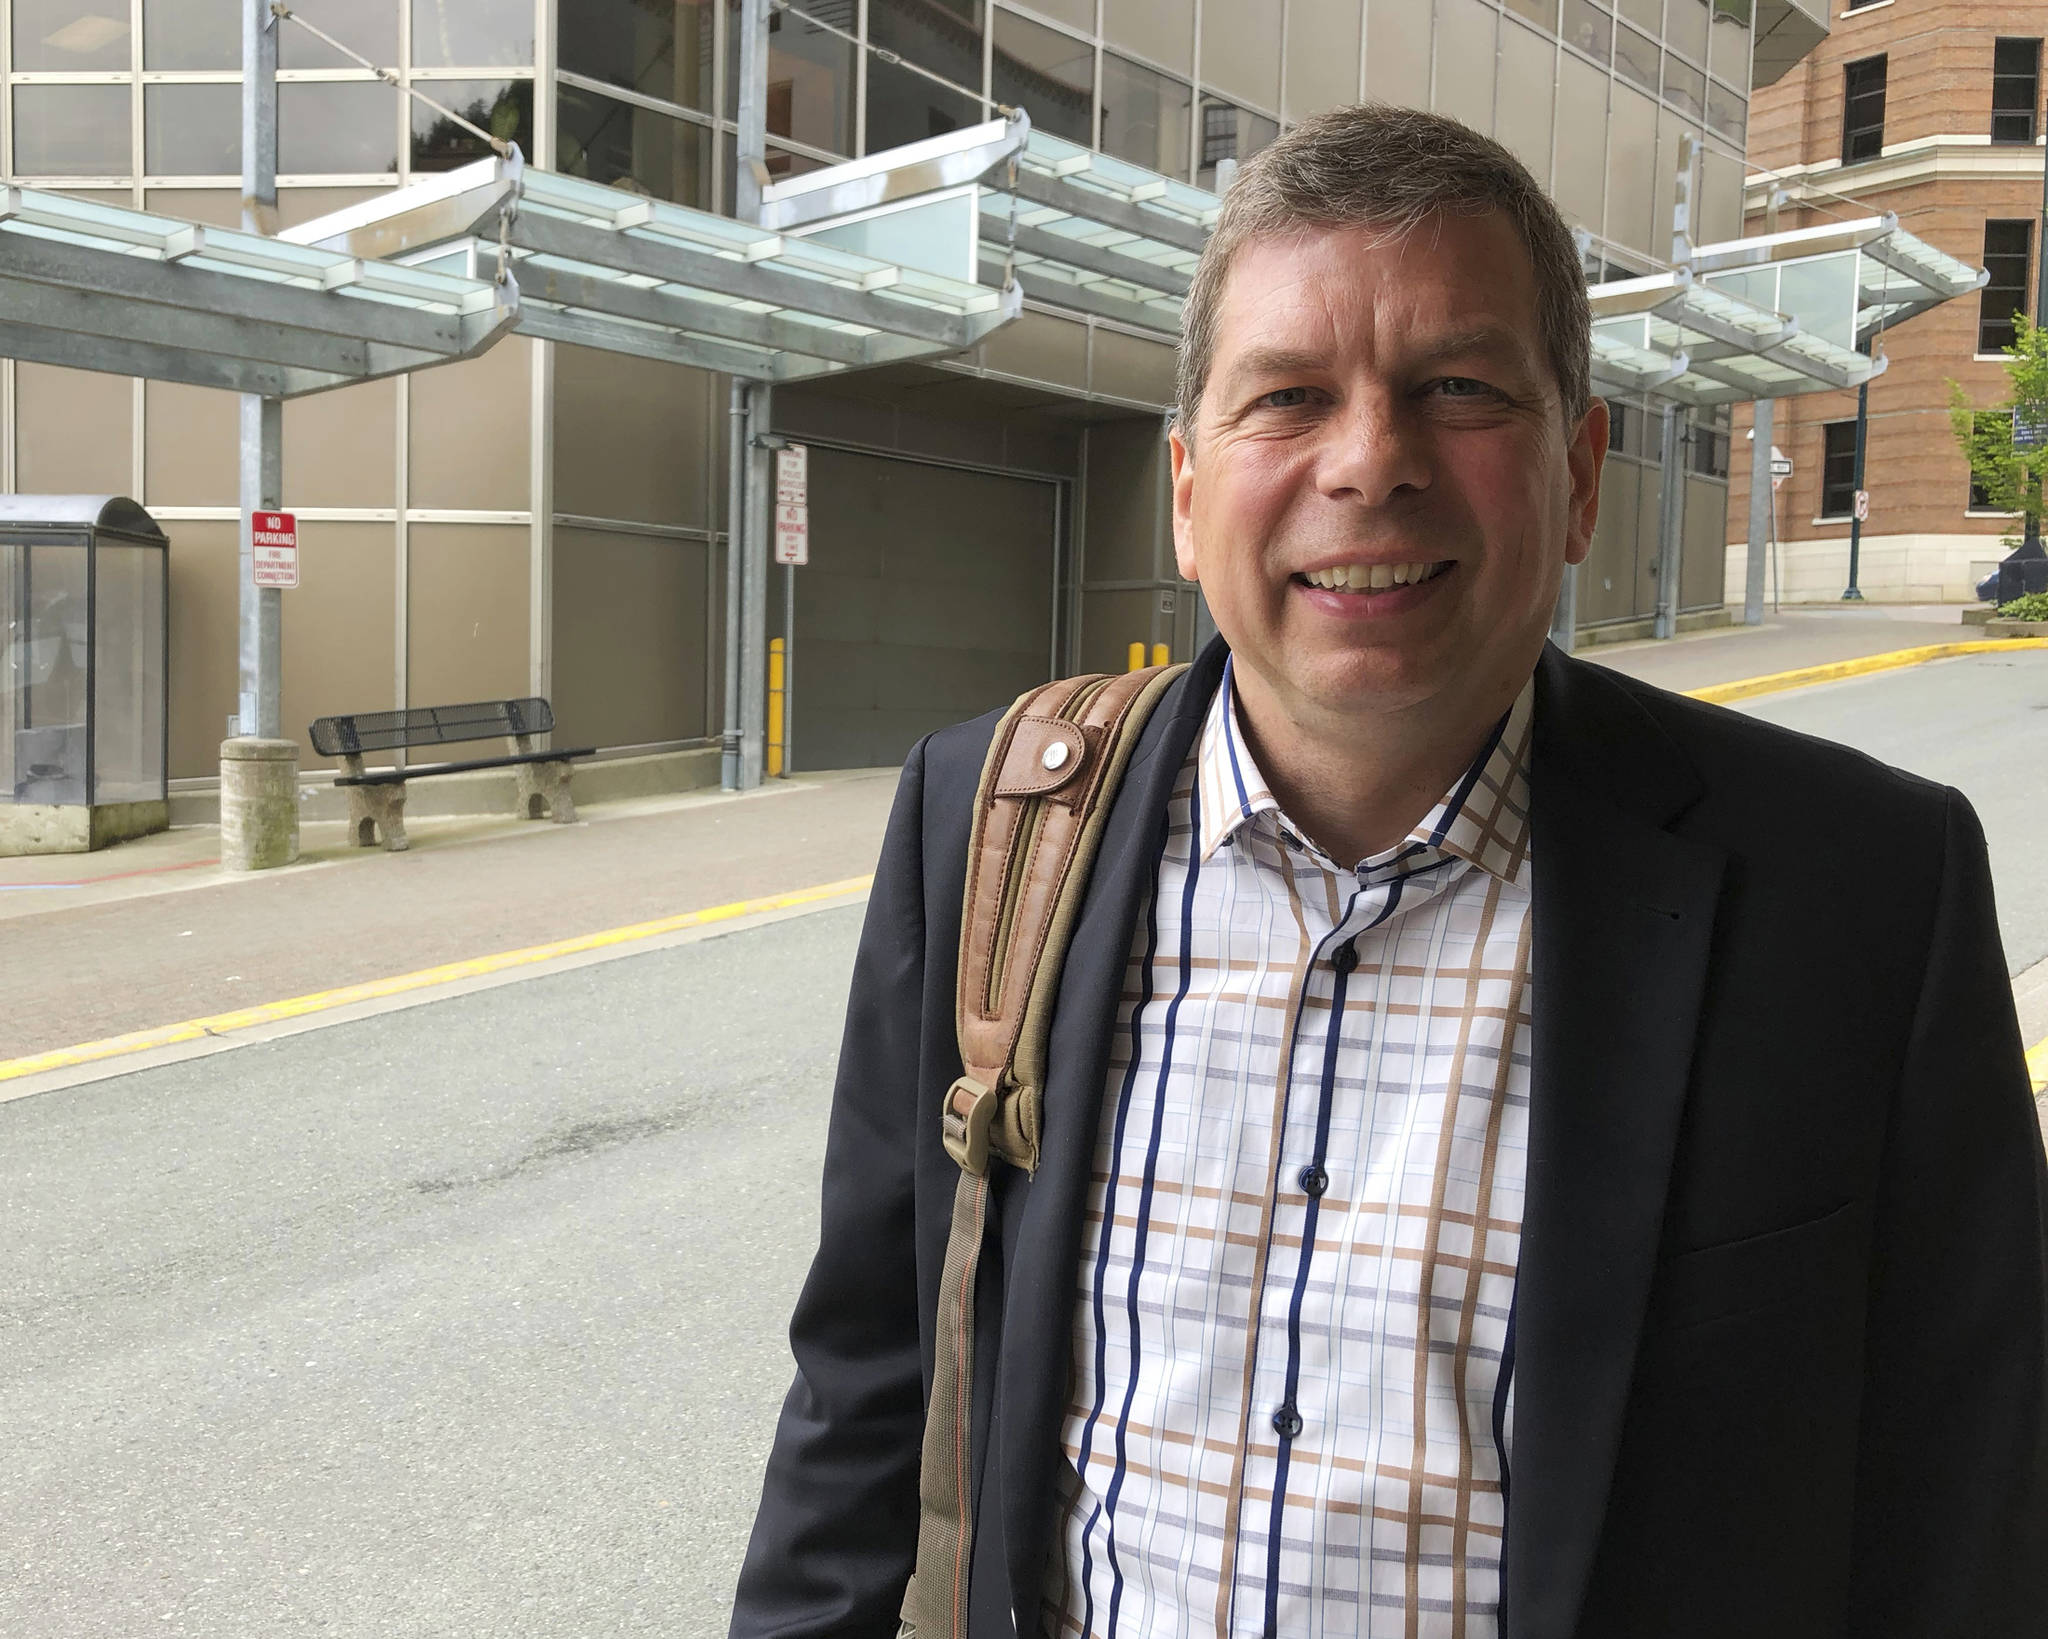 In this June 28, 2018, photo, Democrat Mark Begich, a candidate for governor in Alaska and a former U.S. senator, poses outside a downtown office building in Juneau, Alaska. Begich is seeking to ease concerns some have about his entry into the race, saying he would not be running if he did not think he could win. The race is shaping up to be a three-way, general election contest between Begich, independent Gov. Bill Walker and the eventual Republican nominee. (AP Photo/Becky Bohrer)